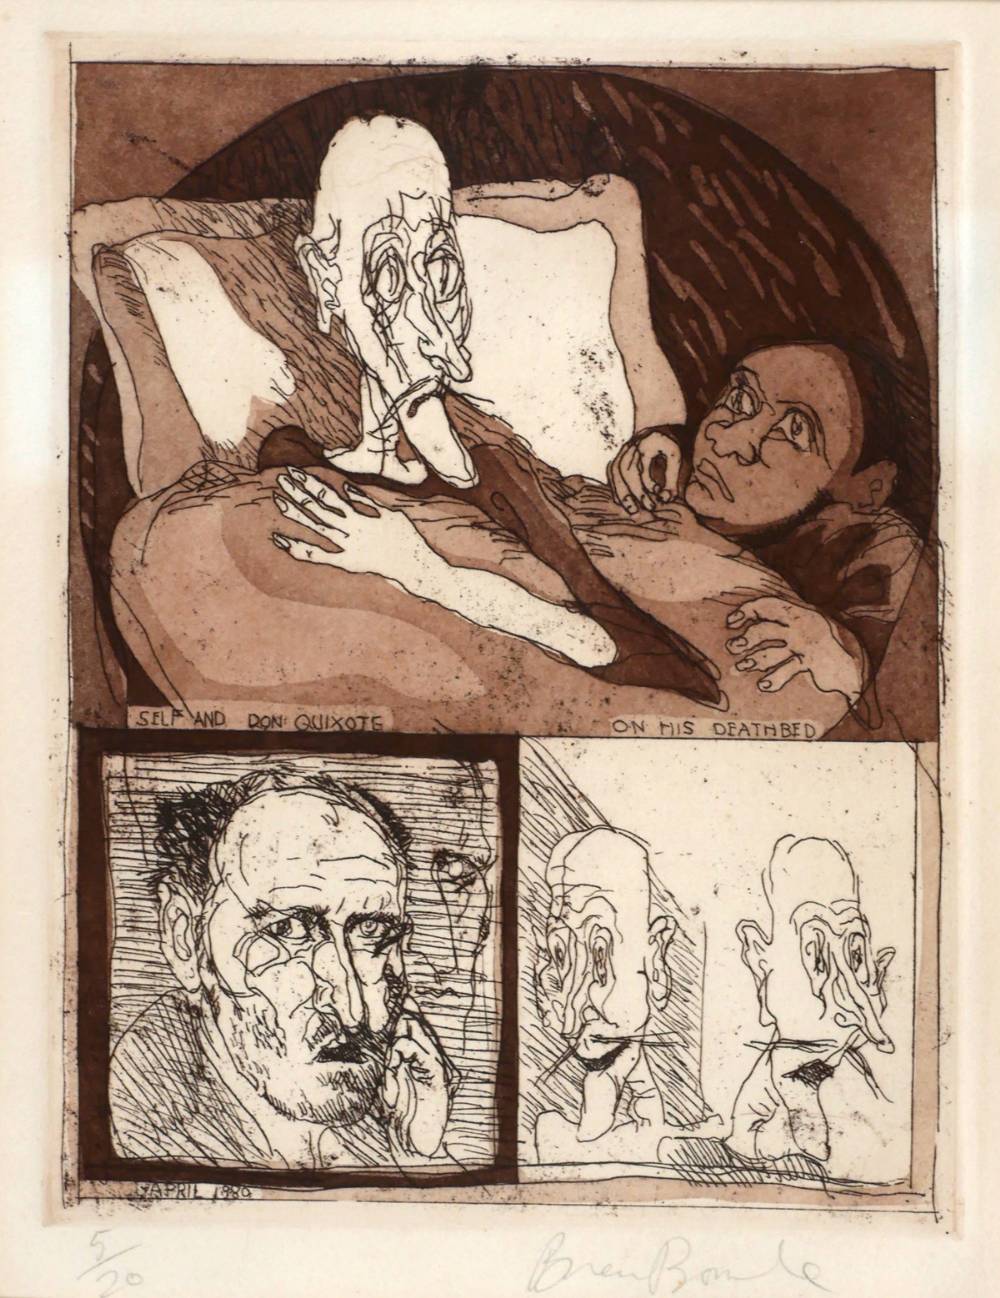 SELF AND DON QUIXOTE ON HIS DEATH-BED, 1980 by Brian Bourke sold for 170 at Whyte's Auctions